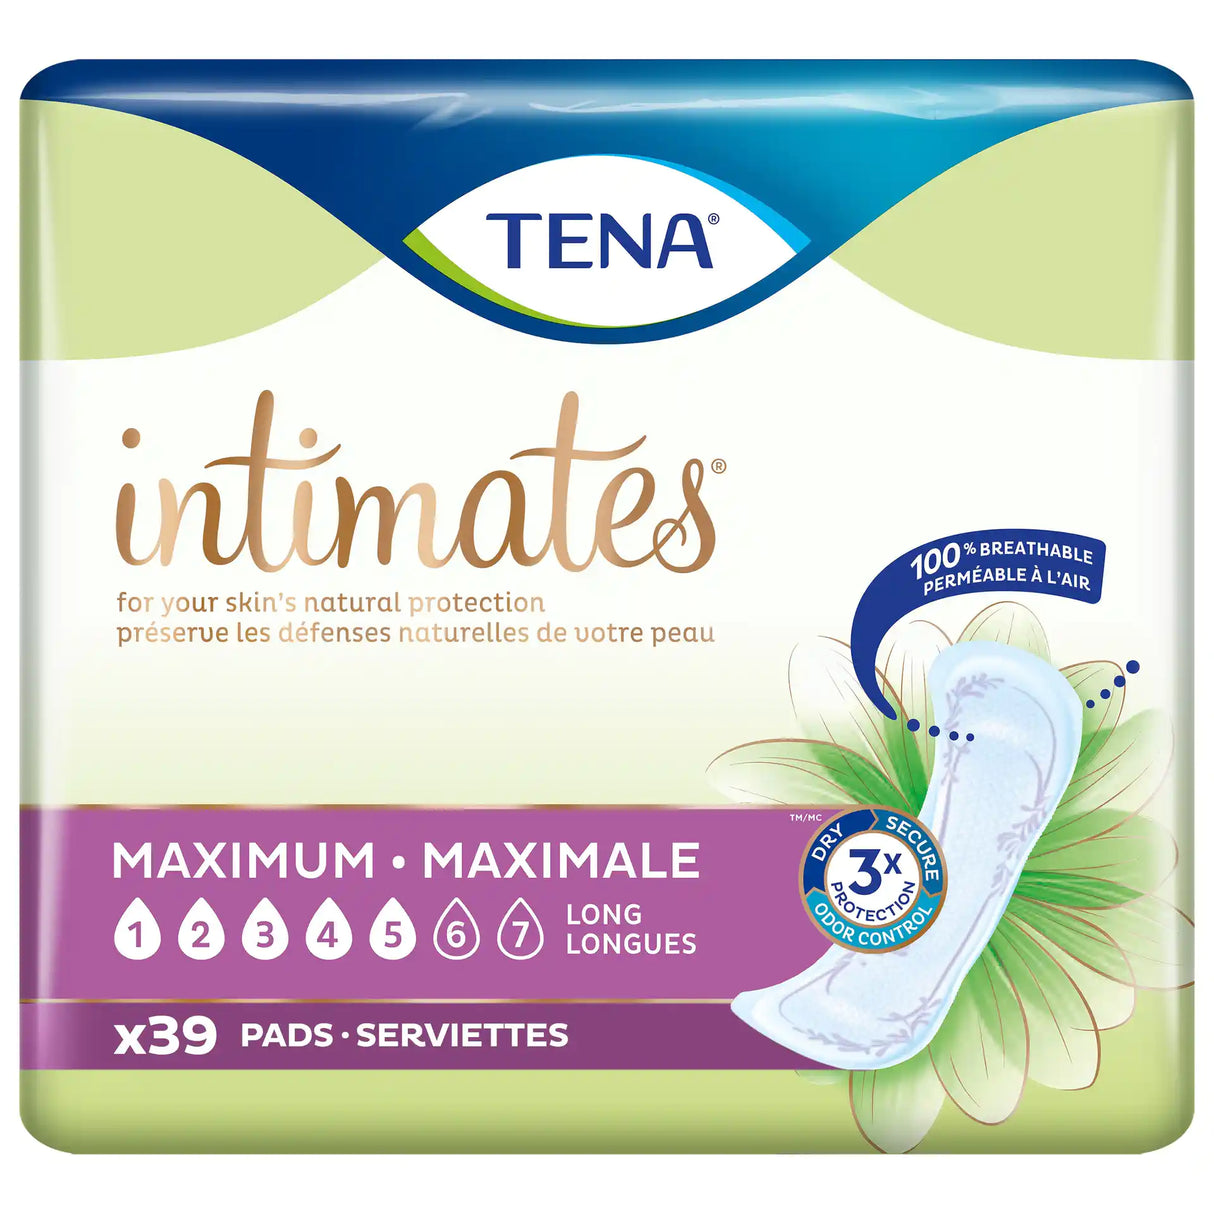 Image of TENA Intimates Pads and Liners